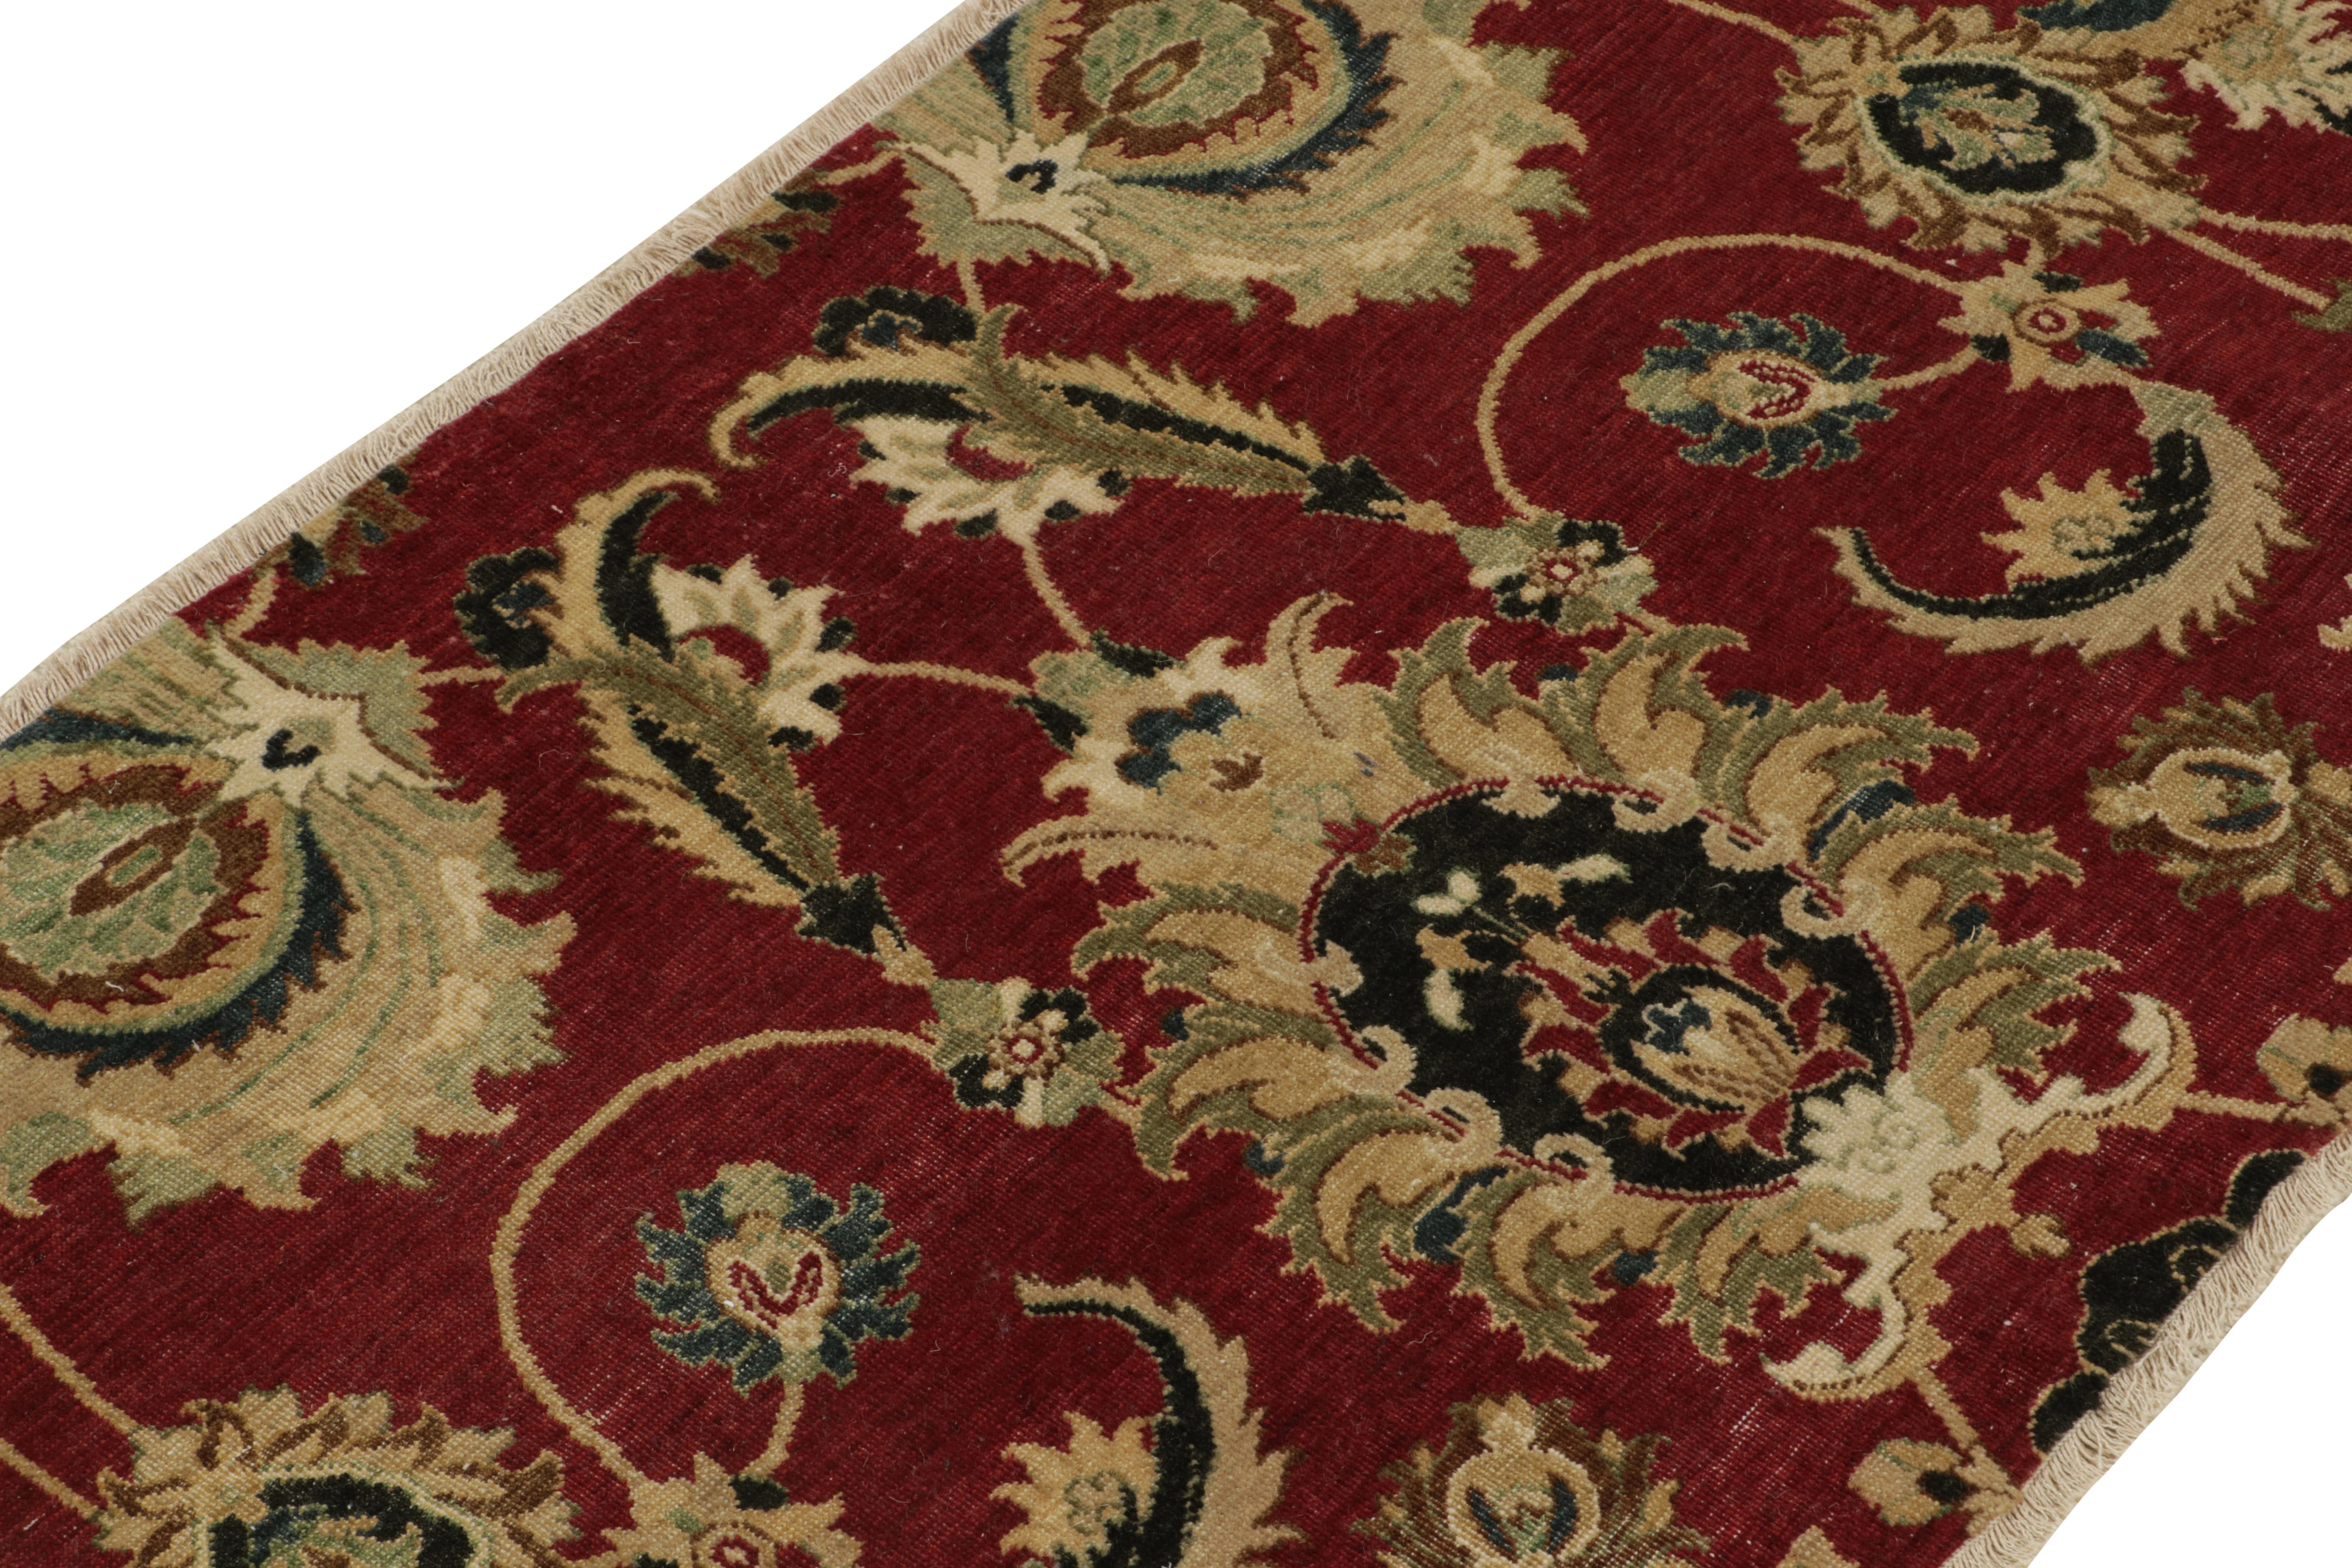 Hand-Knotted Rug & Kilim's 17th-Century Inspired Rug in Burgundy, Gold & Green Florals For Sale